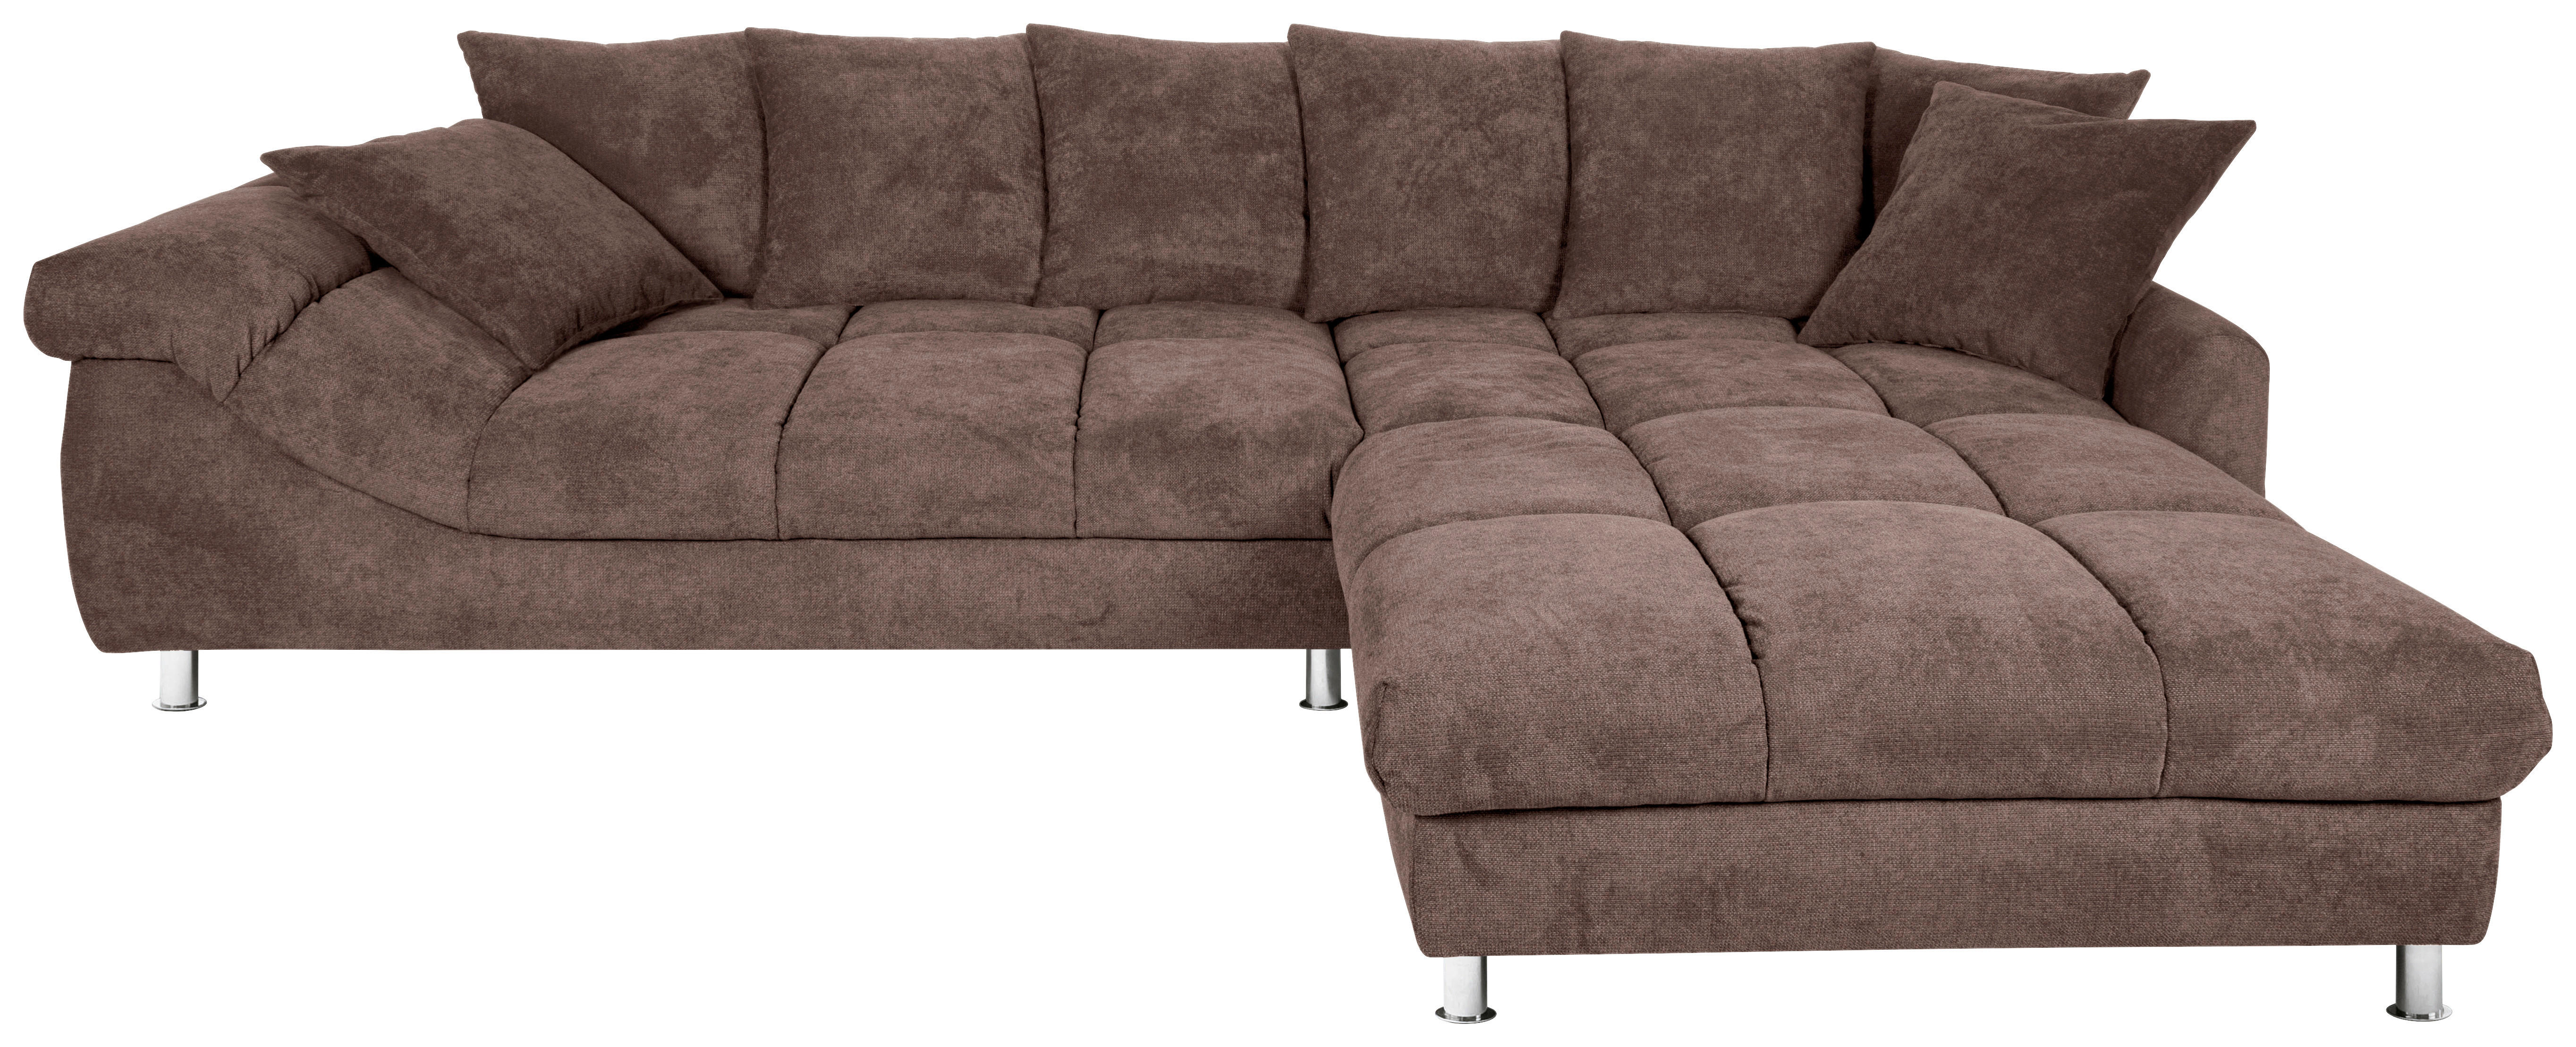 ECKSOFA in Webstoff Taupe  - Taupe, Design, Textil/Metall (337/228cm) - Carryhome